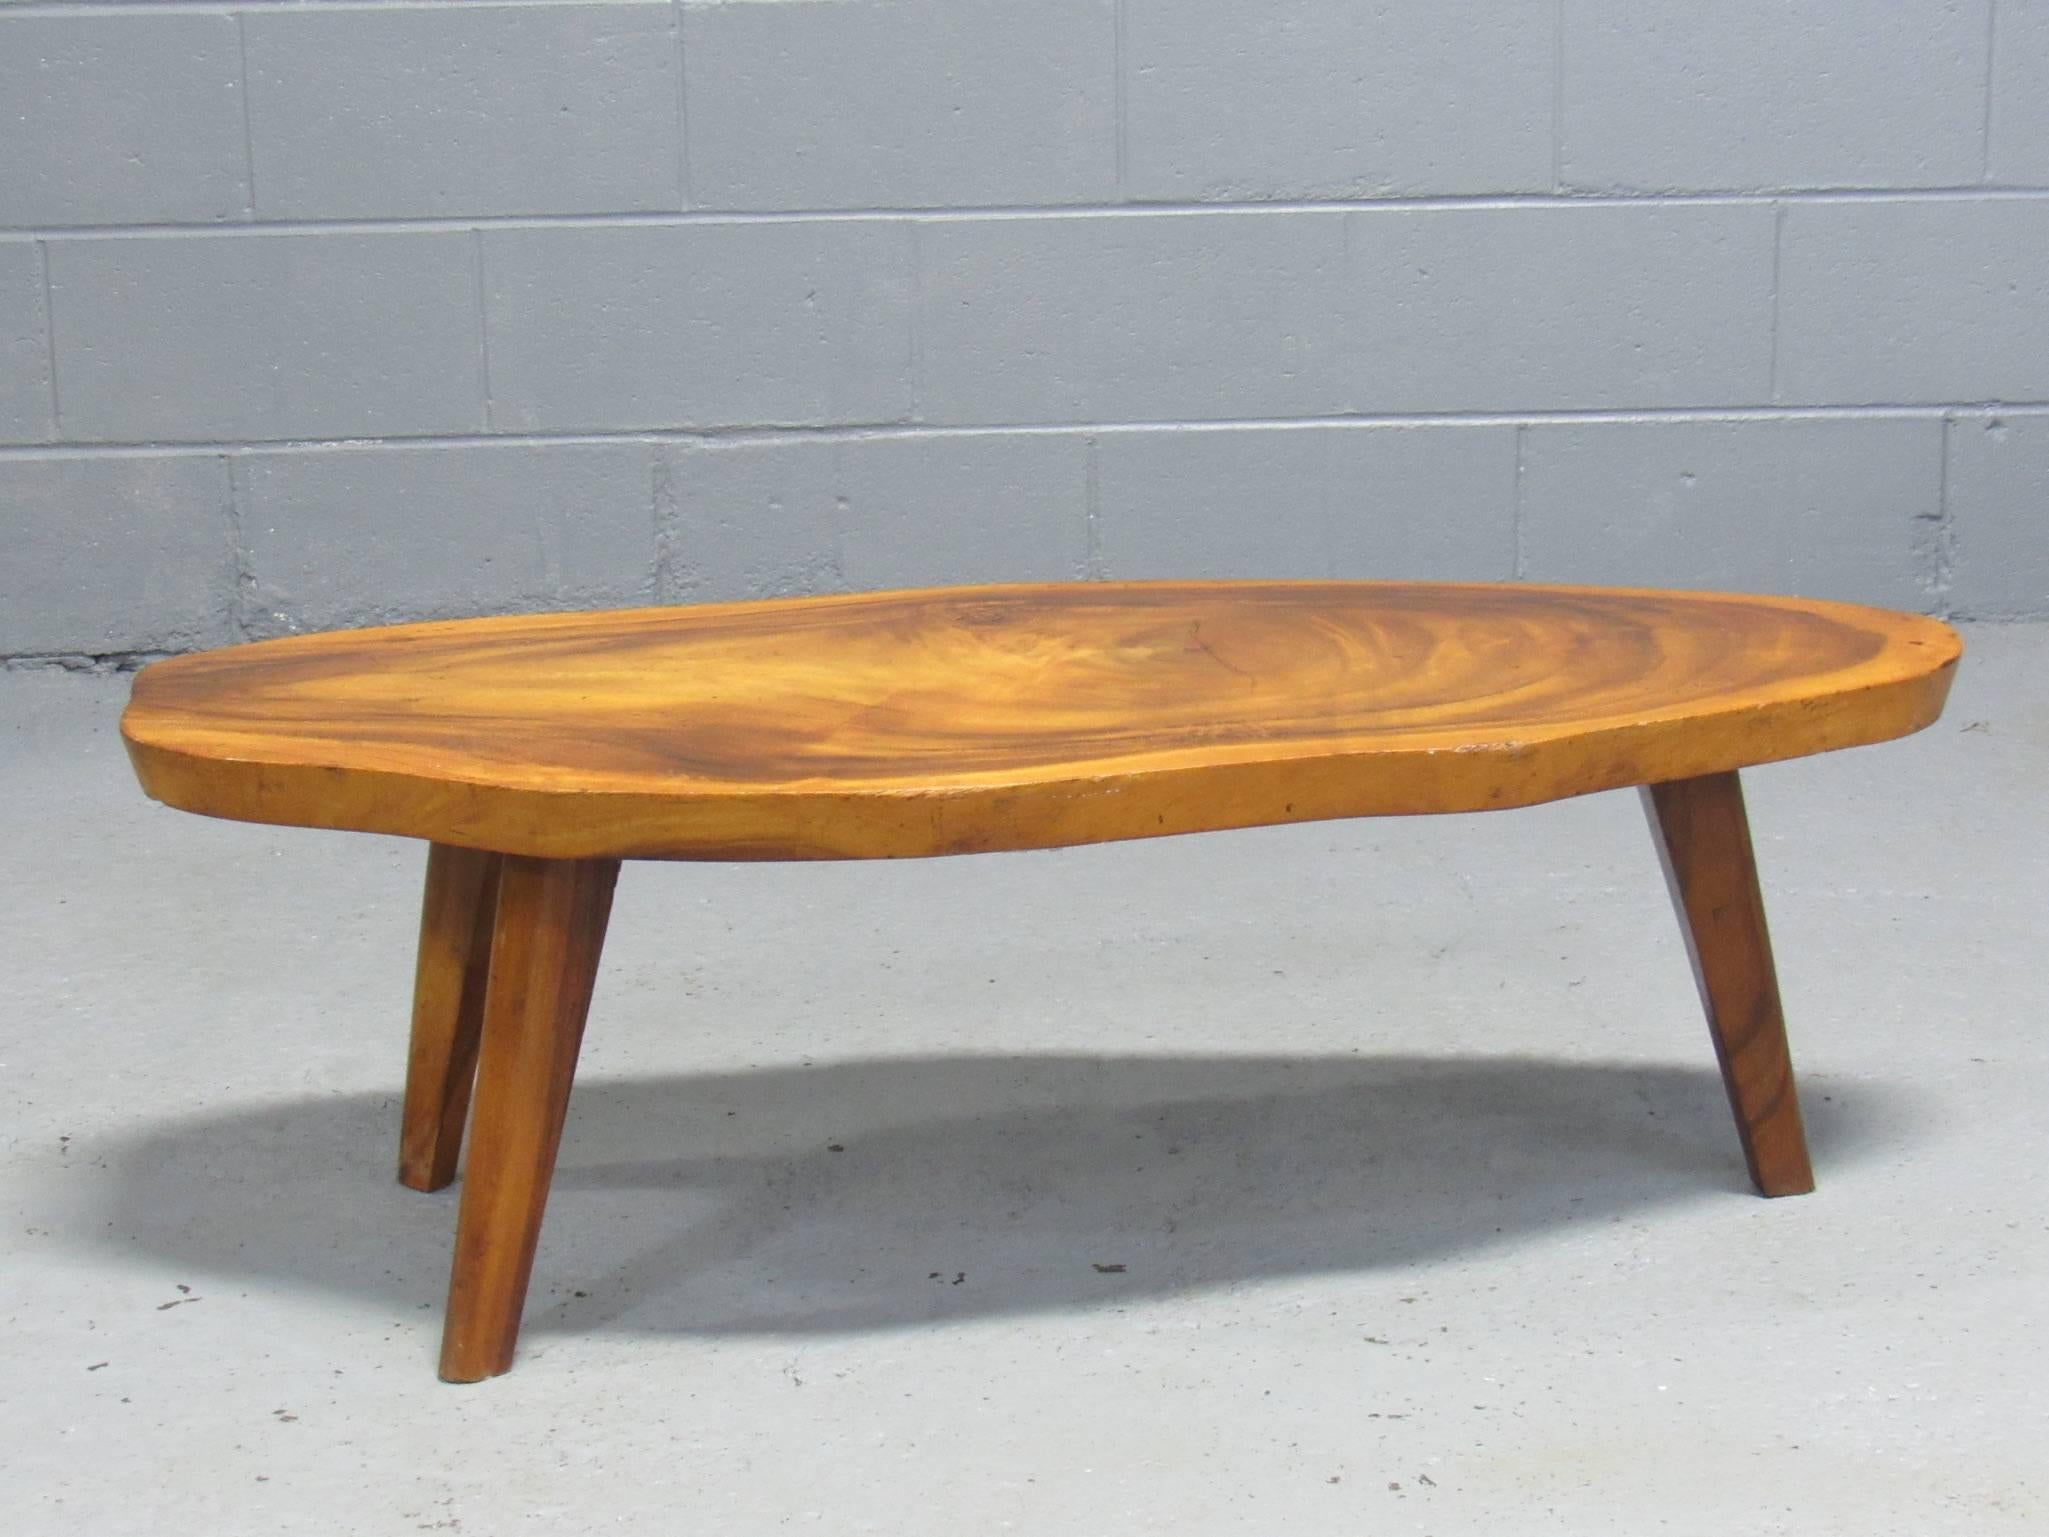 Standing on three legs, this unique Koa wood coffee table is crafted from a single piece of wood from the trunk of a Koa tree native to Hawaii.